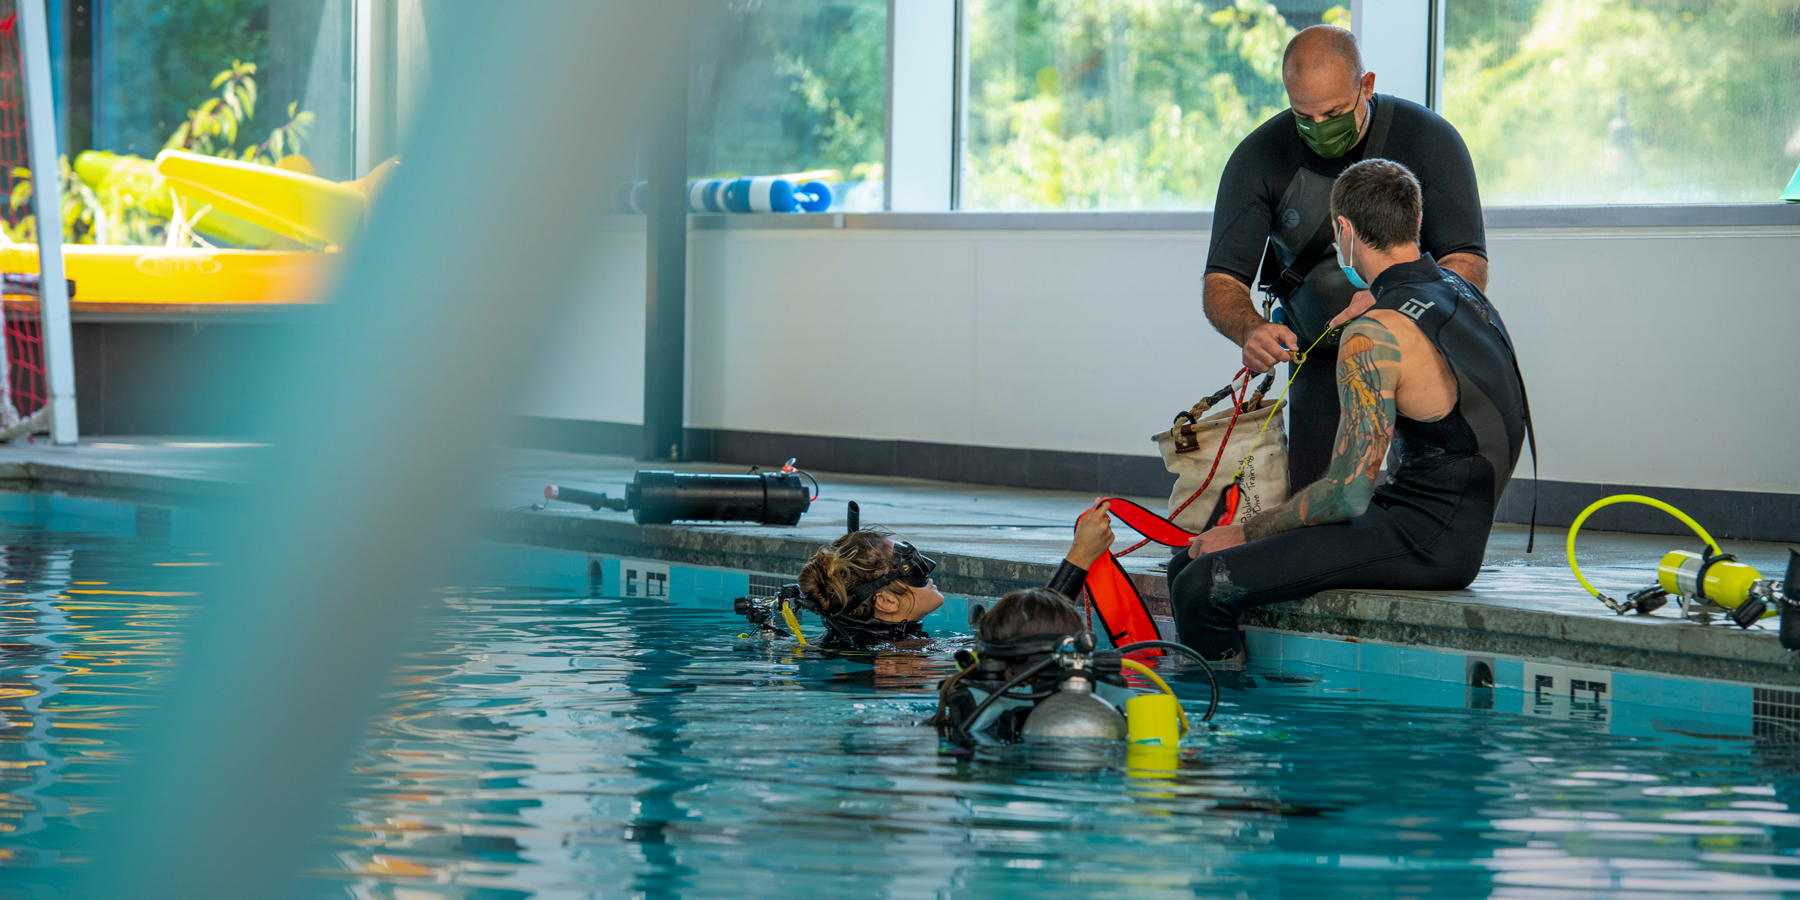 Volunteer divers at Humboldt State gear up for the Public Safety Diver certification course.